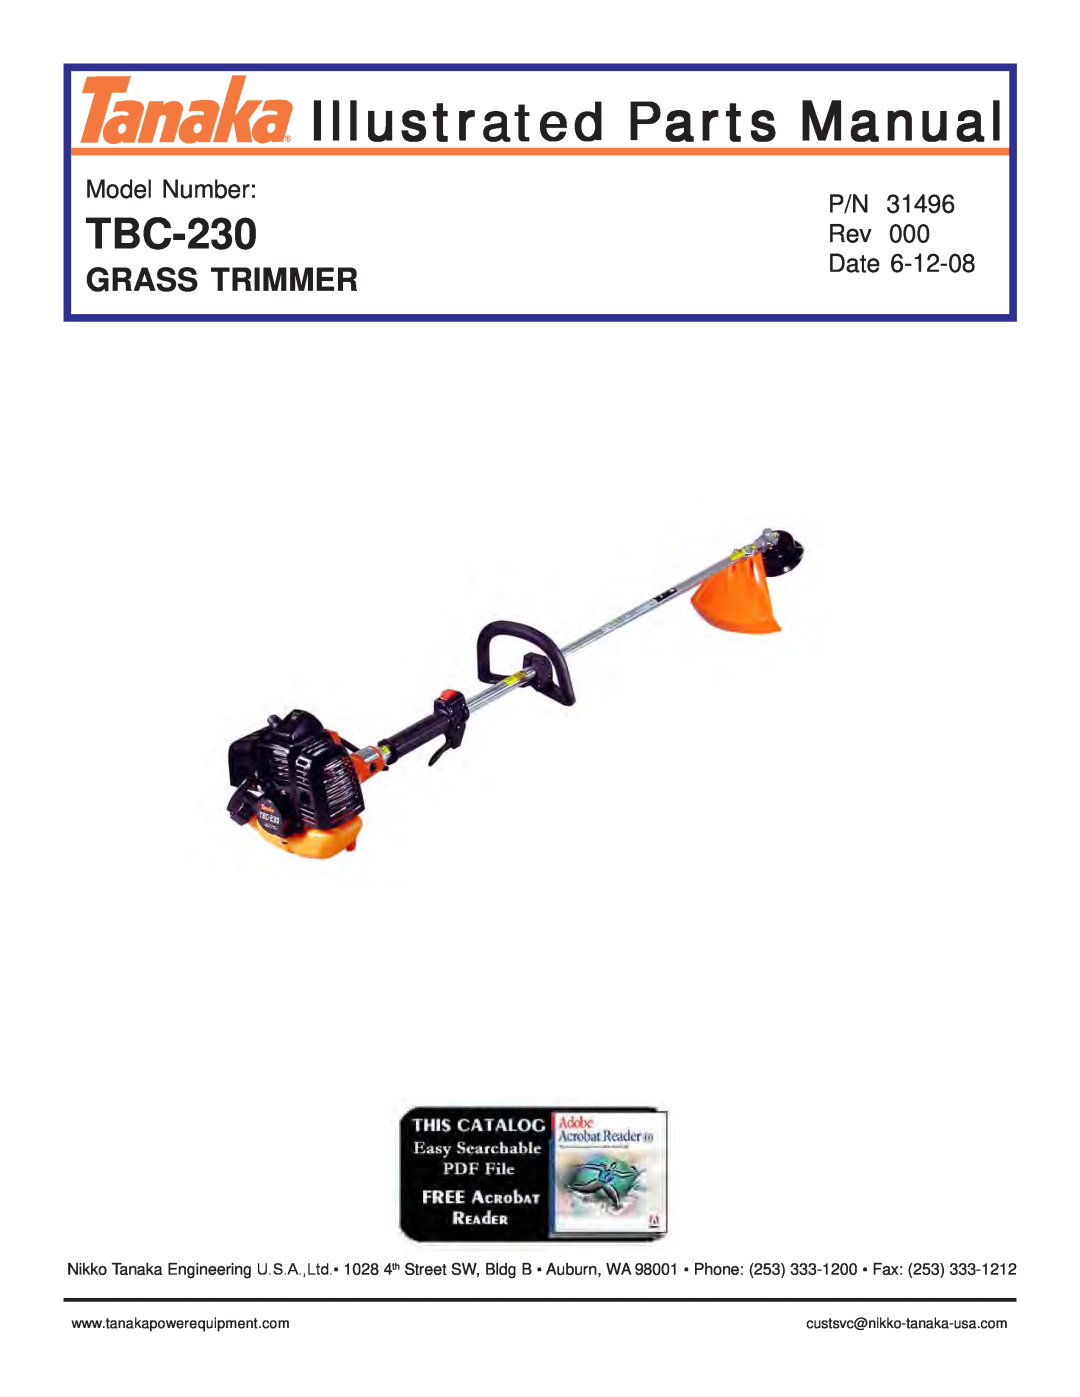 Tanaka TBC-230 manual Grass Trimmer, Model Number, Date, Illustrated Parts Manual 